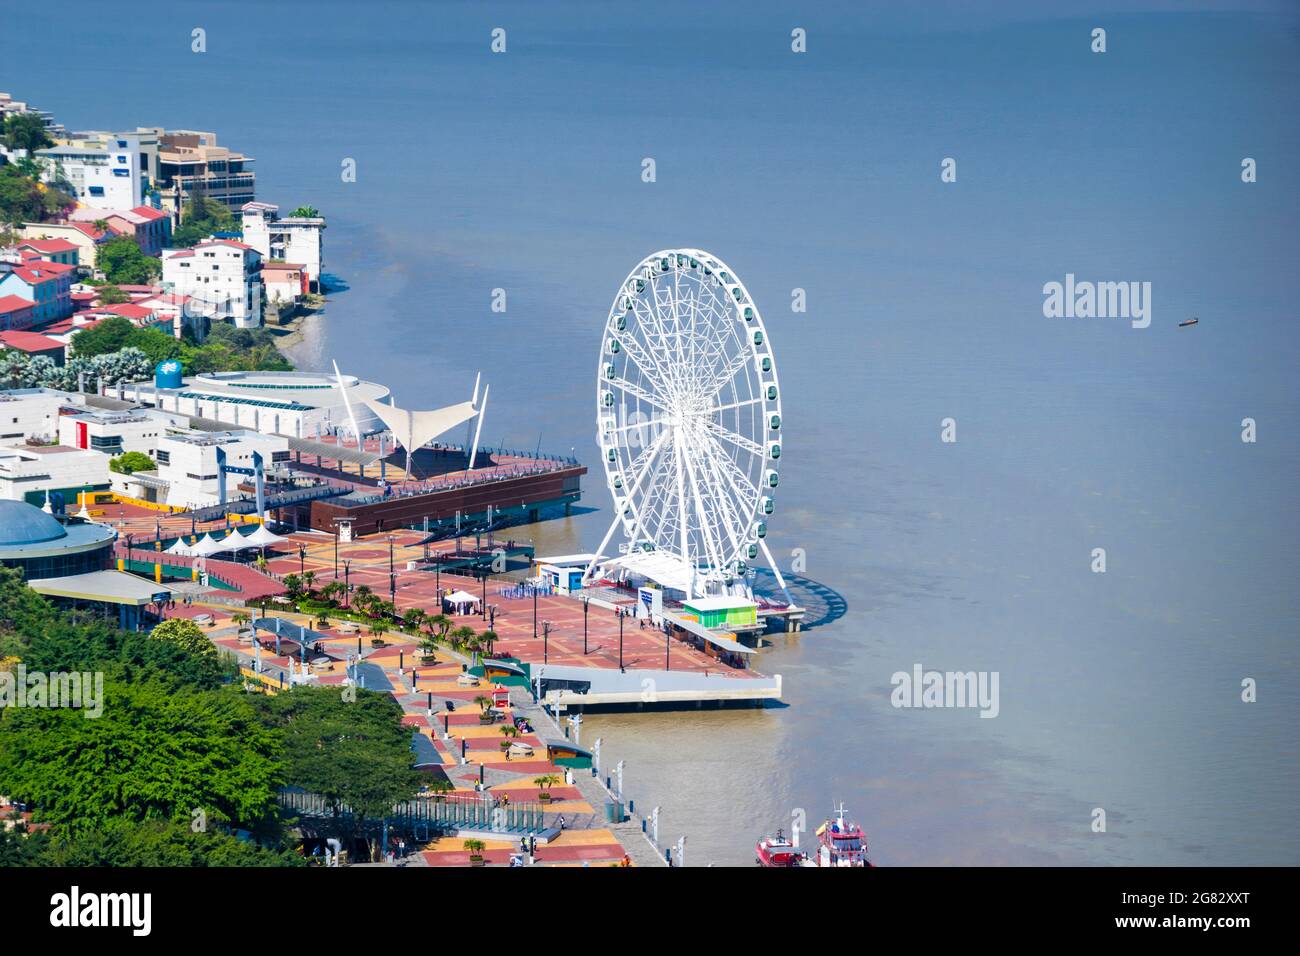 A top aerial view of Guayaquil city in Ecuador. Buildings, Malecon 2000, La Perla ferris wheel and the Guayas river. Stock Photo